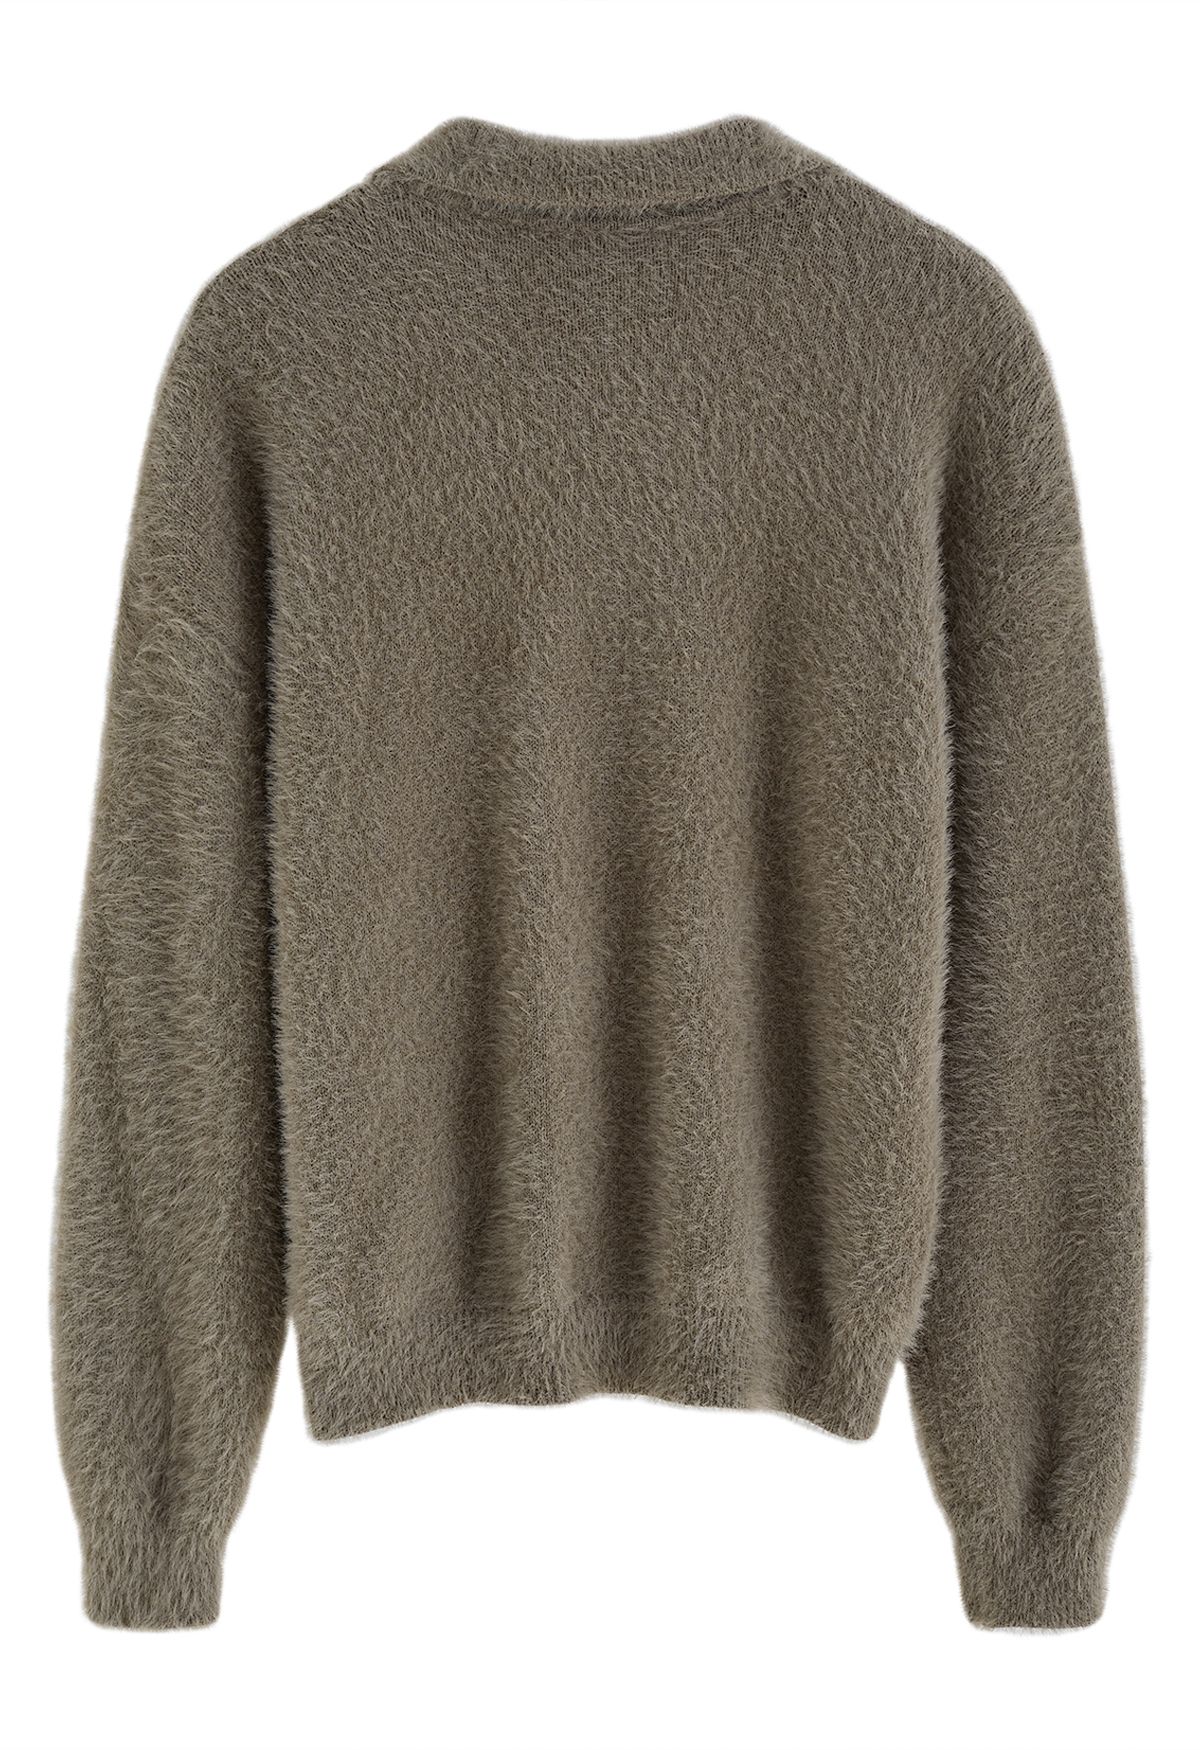 Collar V-Neck Fuzzy Knit Sweater in Taupe